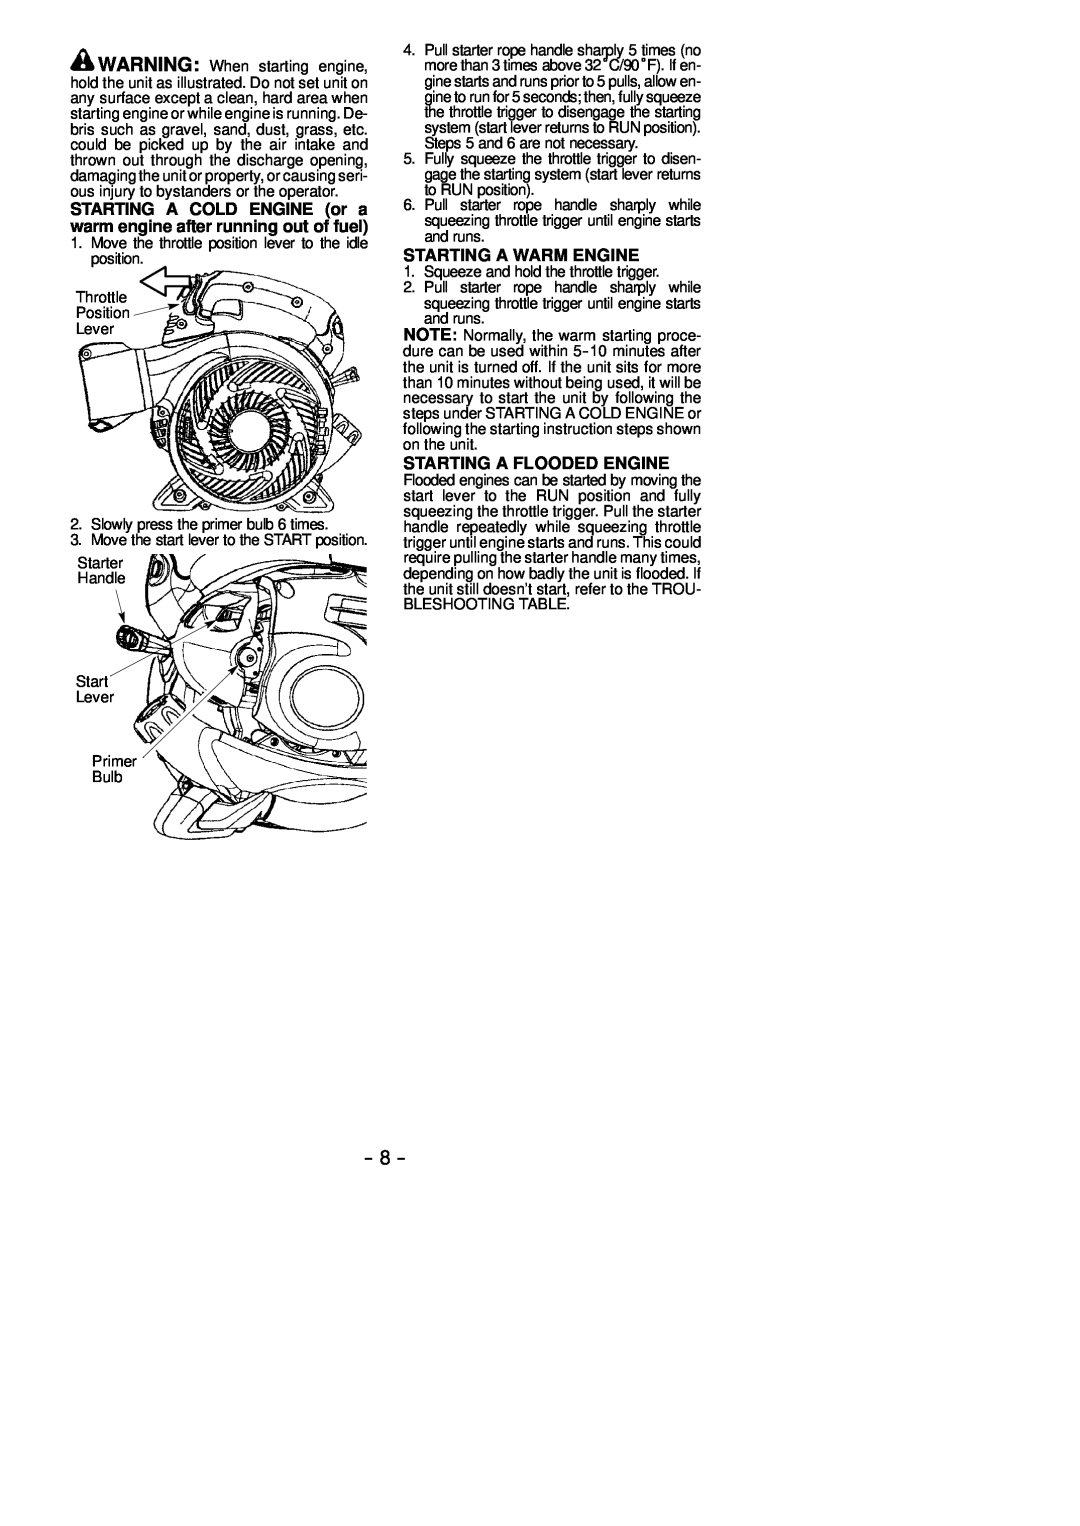 McCulloch MAC GBV 345 instruction manual Starting A Warm Engine, Starting A Flooded Engine 